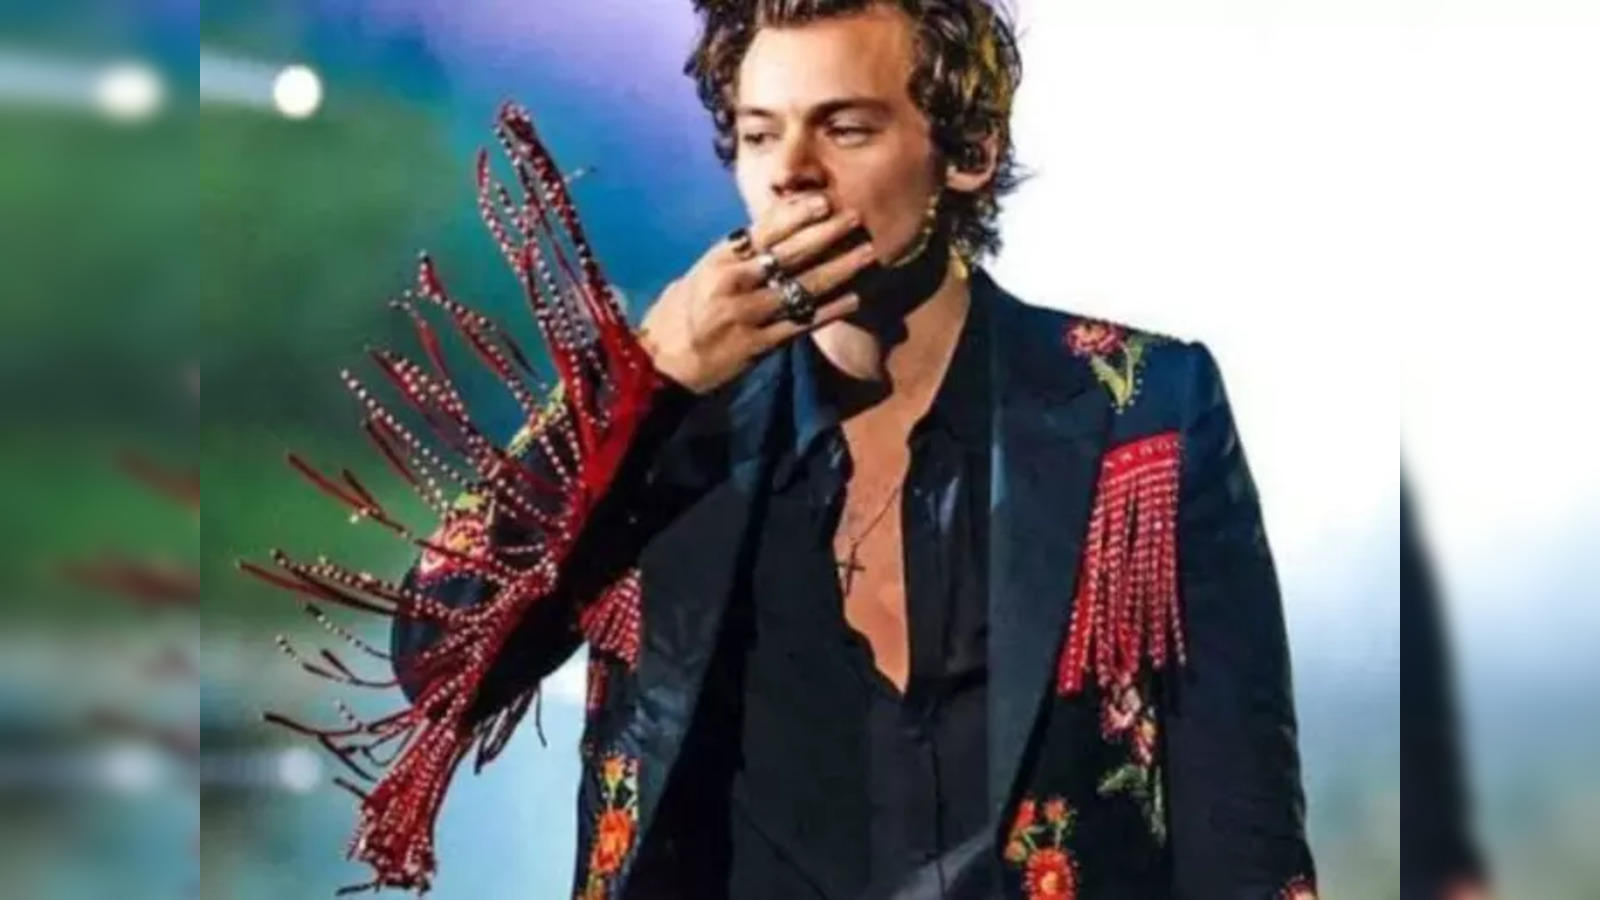 harry styles: Harry Styles' 'Love On Tour' earns USD 600 million. Details  here - The Economic Times